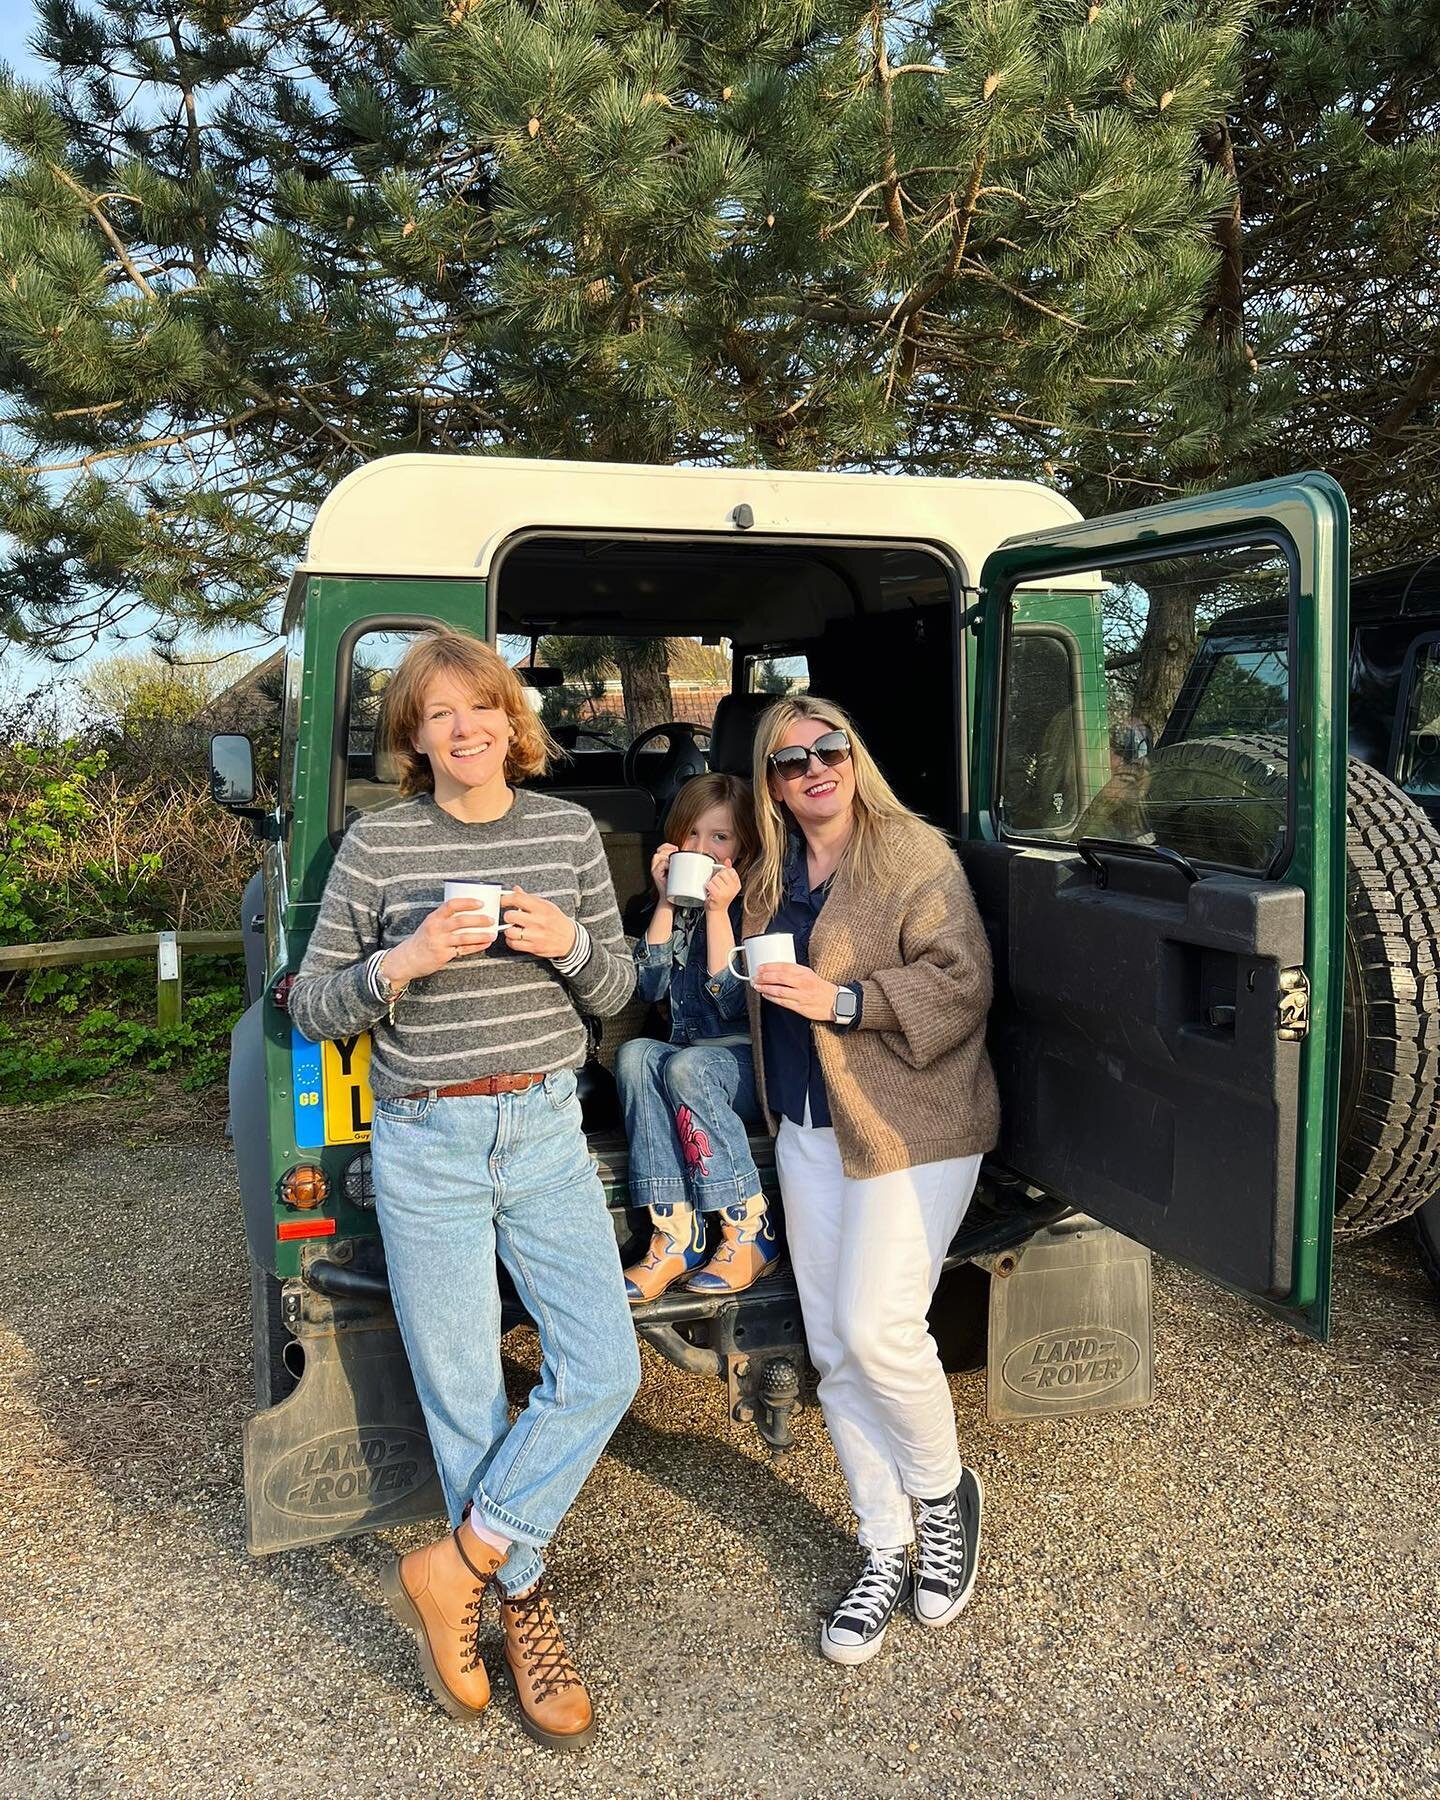 A best weekends are filled with friends, tea and spring things 🌱🐑
.
.
#babylambs #landroverdefender #landroverlife #landylove #suffolkcoast #suffolklife